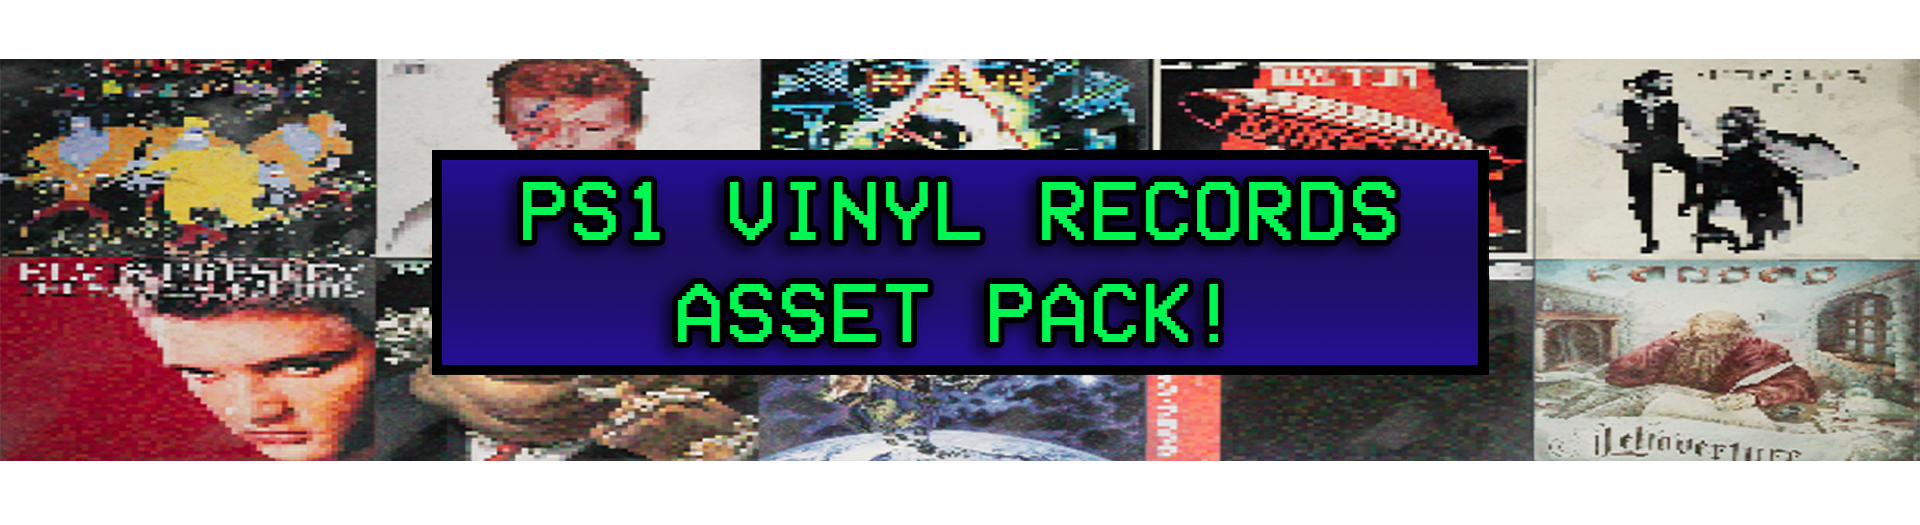 PSX PS1 Vinyl Records/Covers Low Poly - Free Asset Pack!